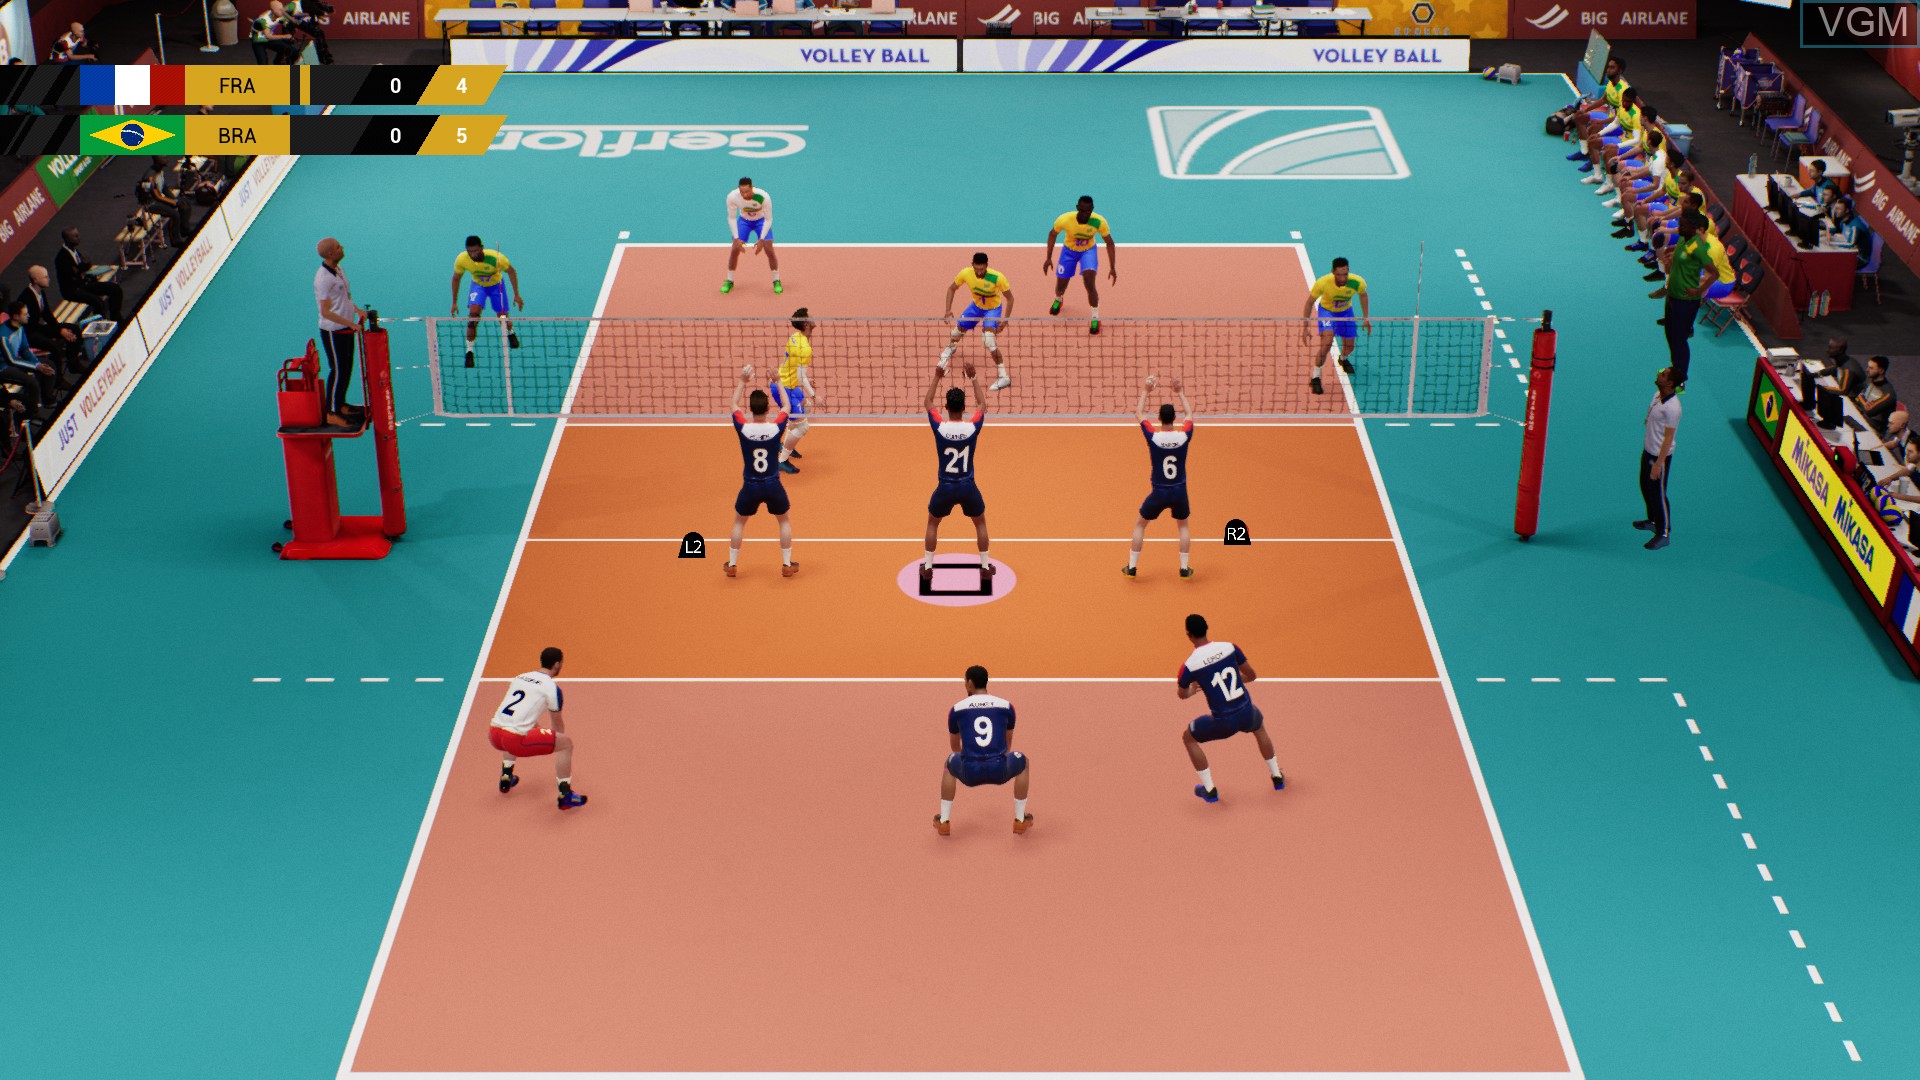 Spike Volleyball For Sony Playstation 4 The Video Games Museum